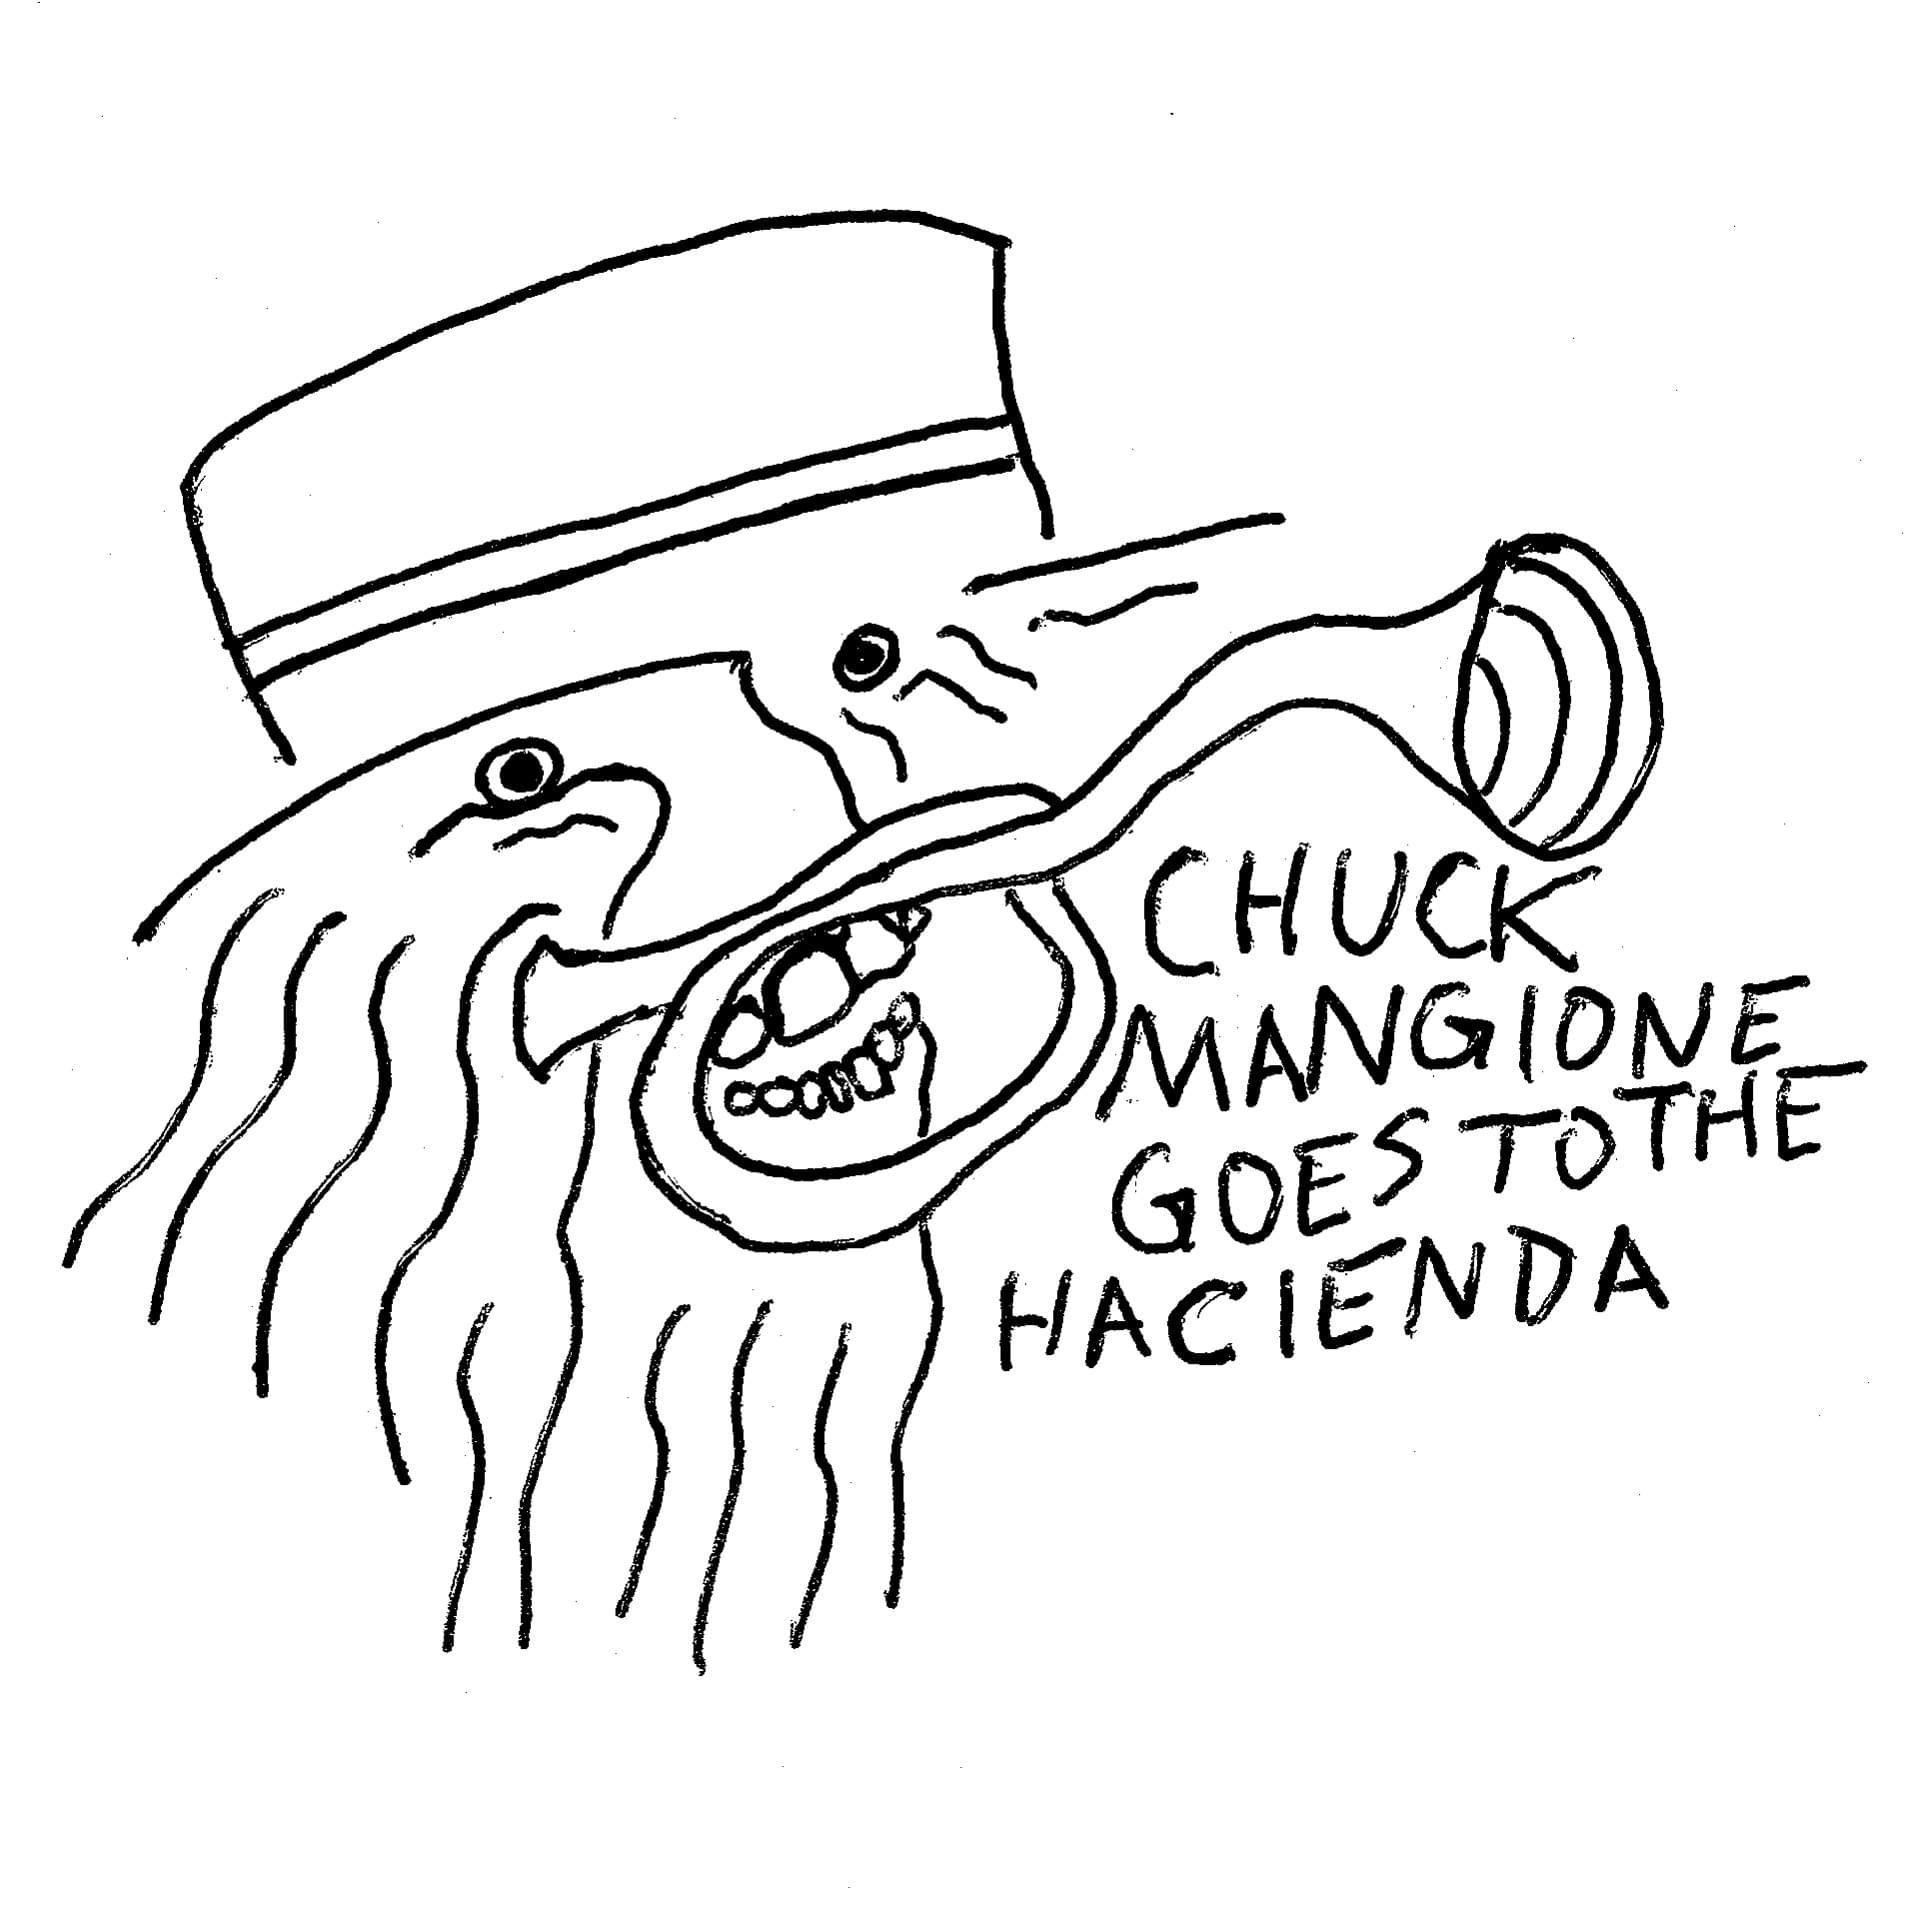 Cover art for Nikki Nair's song: Chuck Mangione goes to the Hacienda